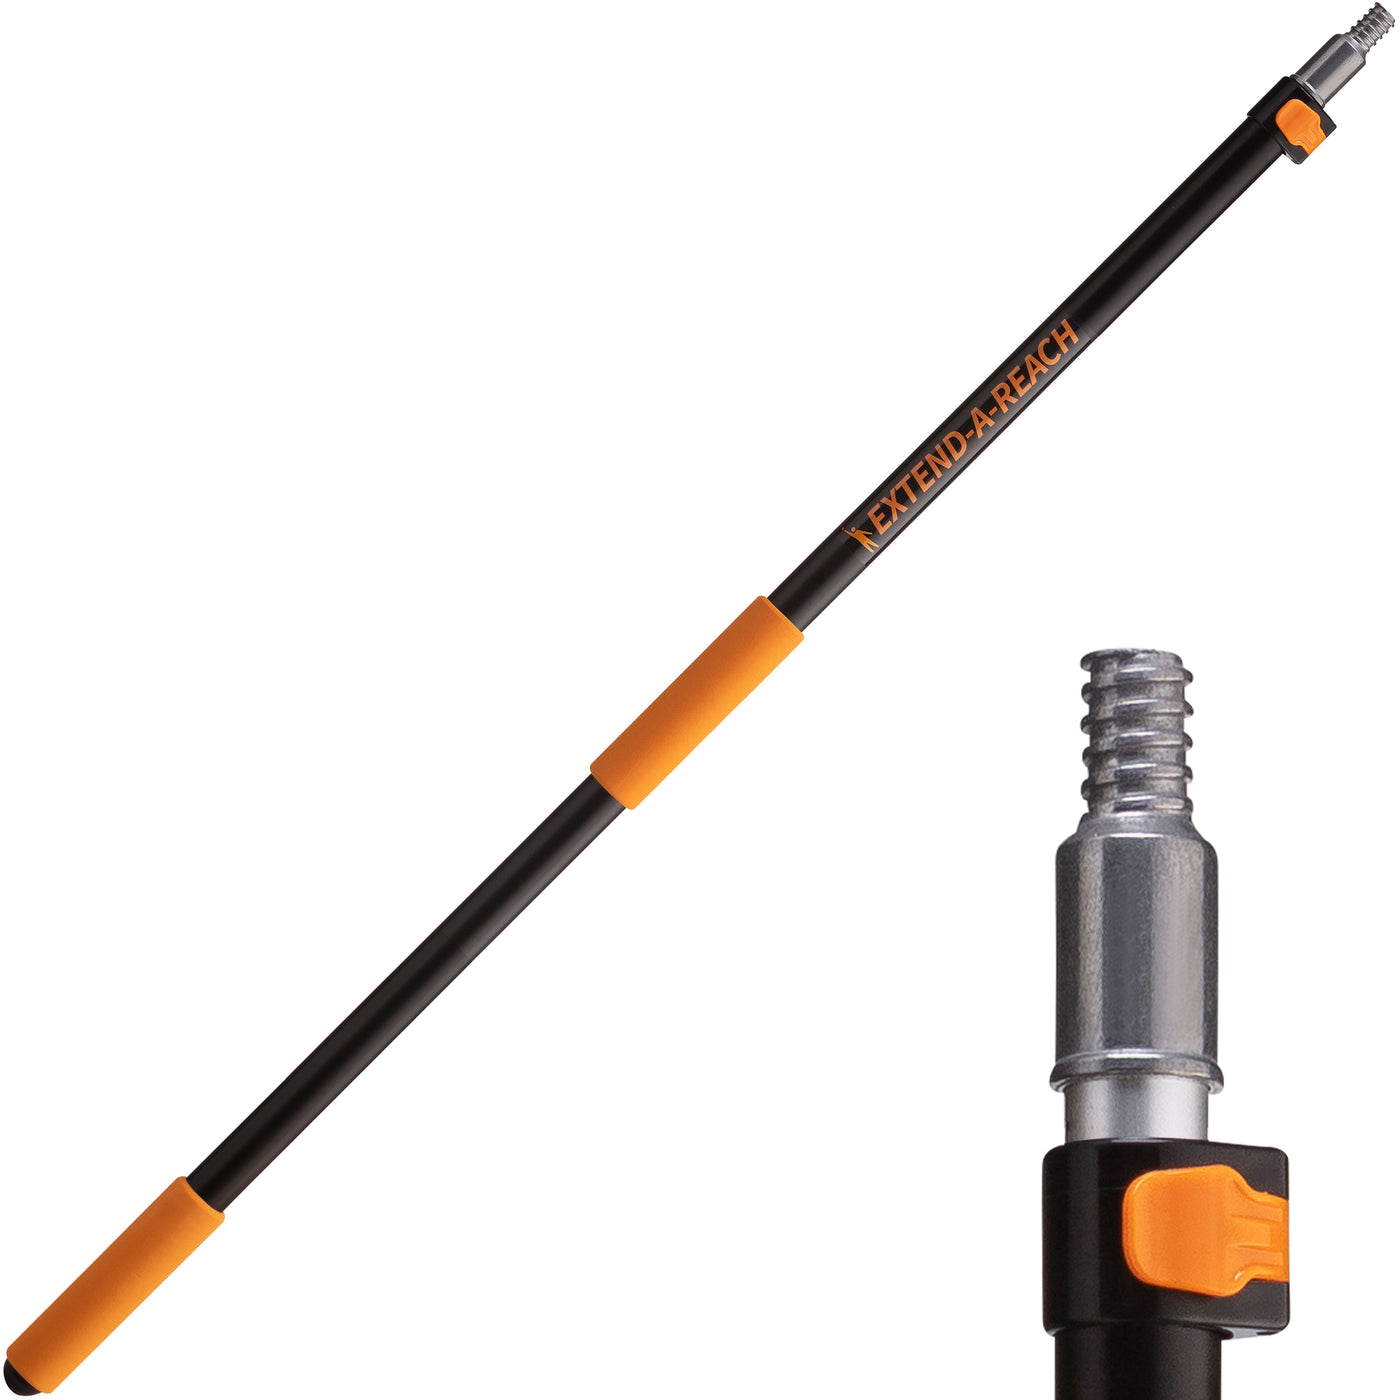 5-8ft Telescopic Extension Pole // Dusting, Window Cleaning